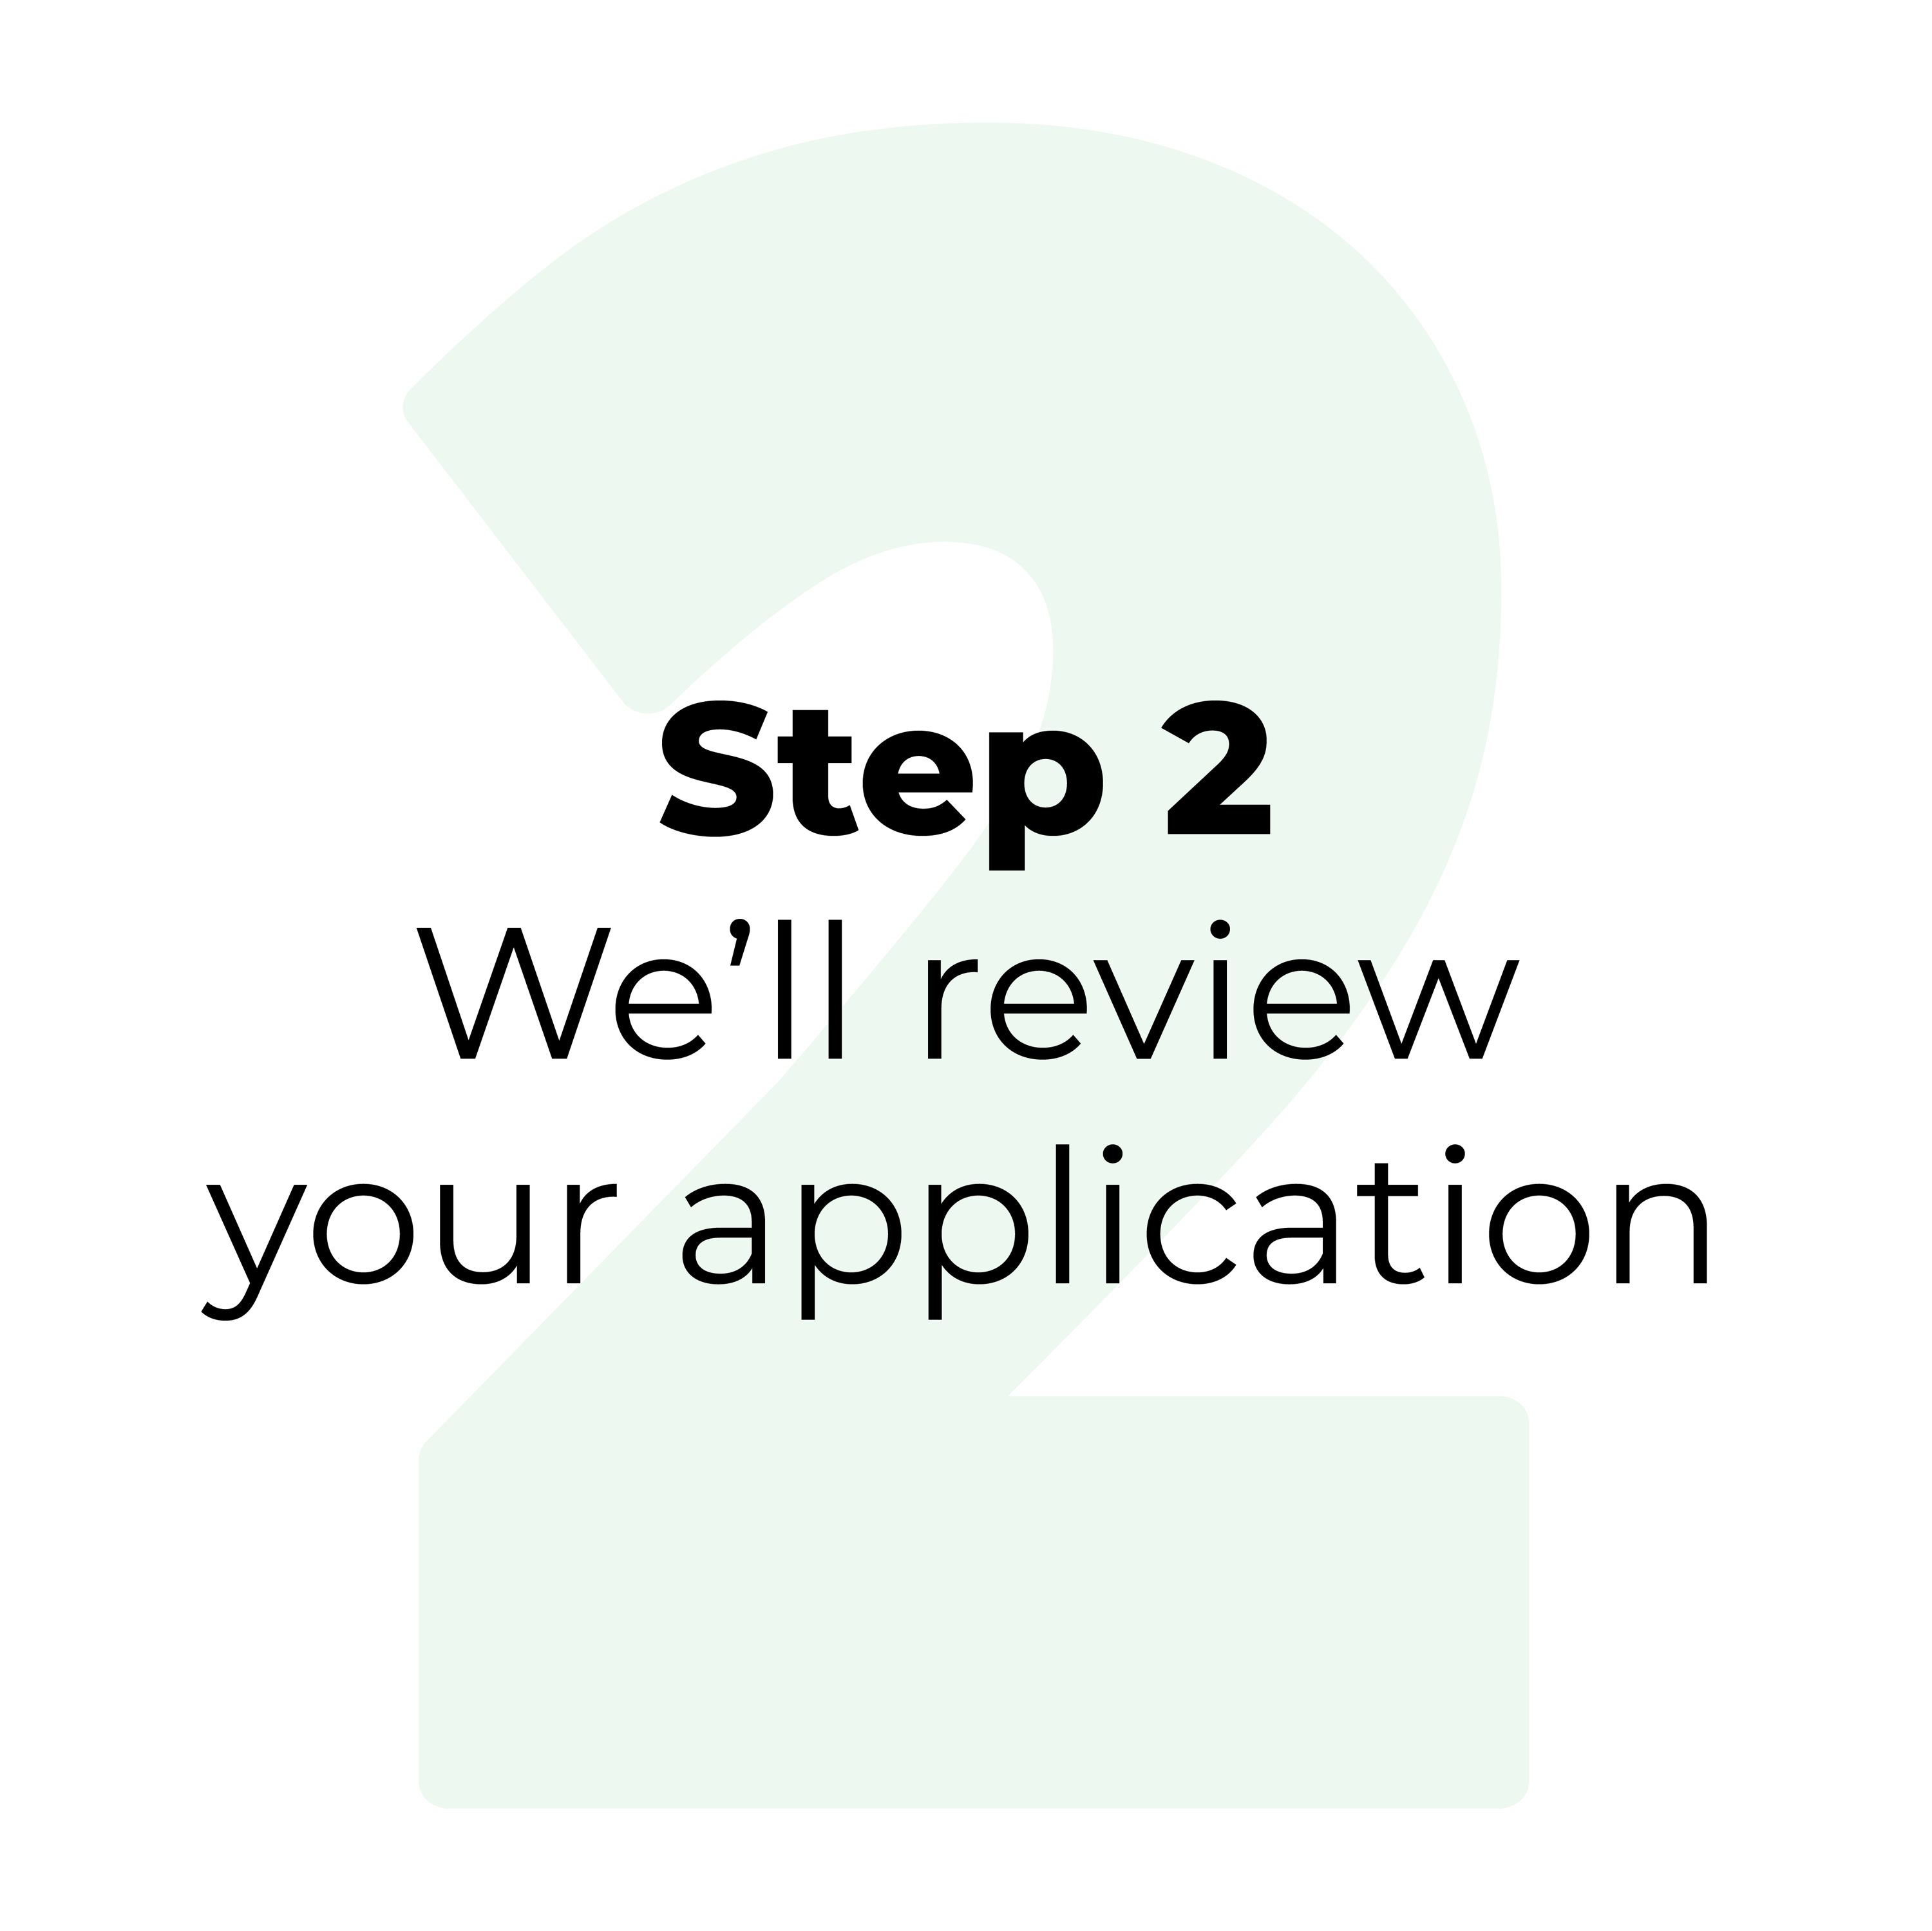 Step 2. We'll review your application